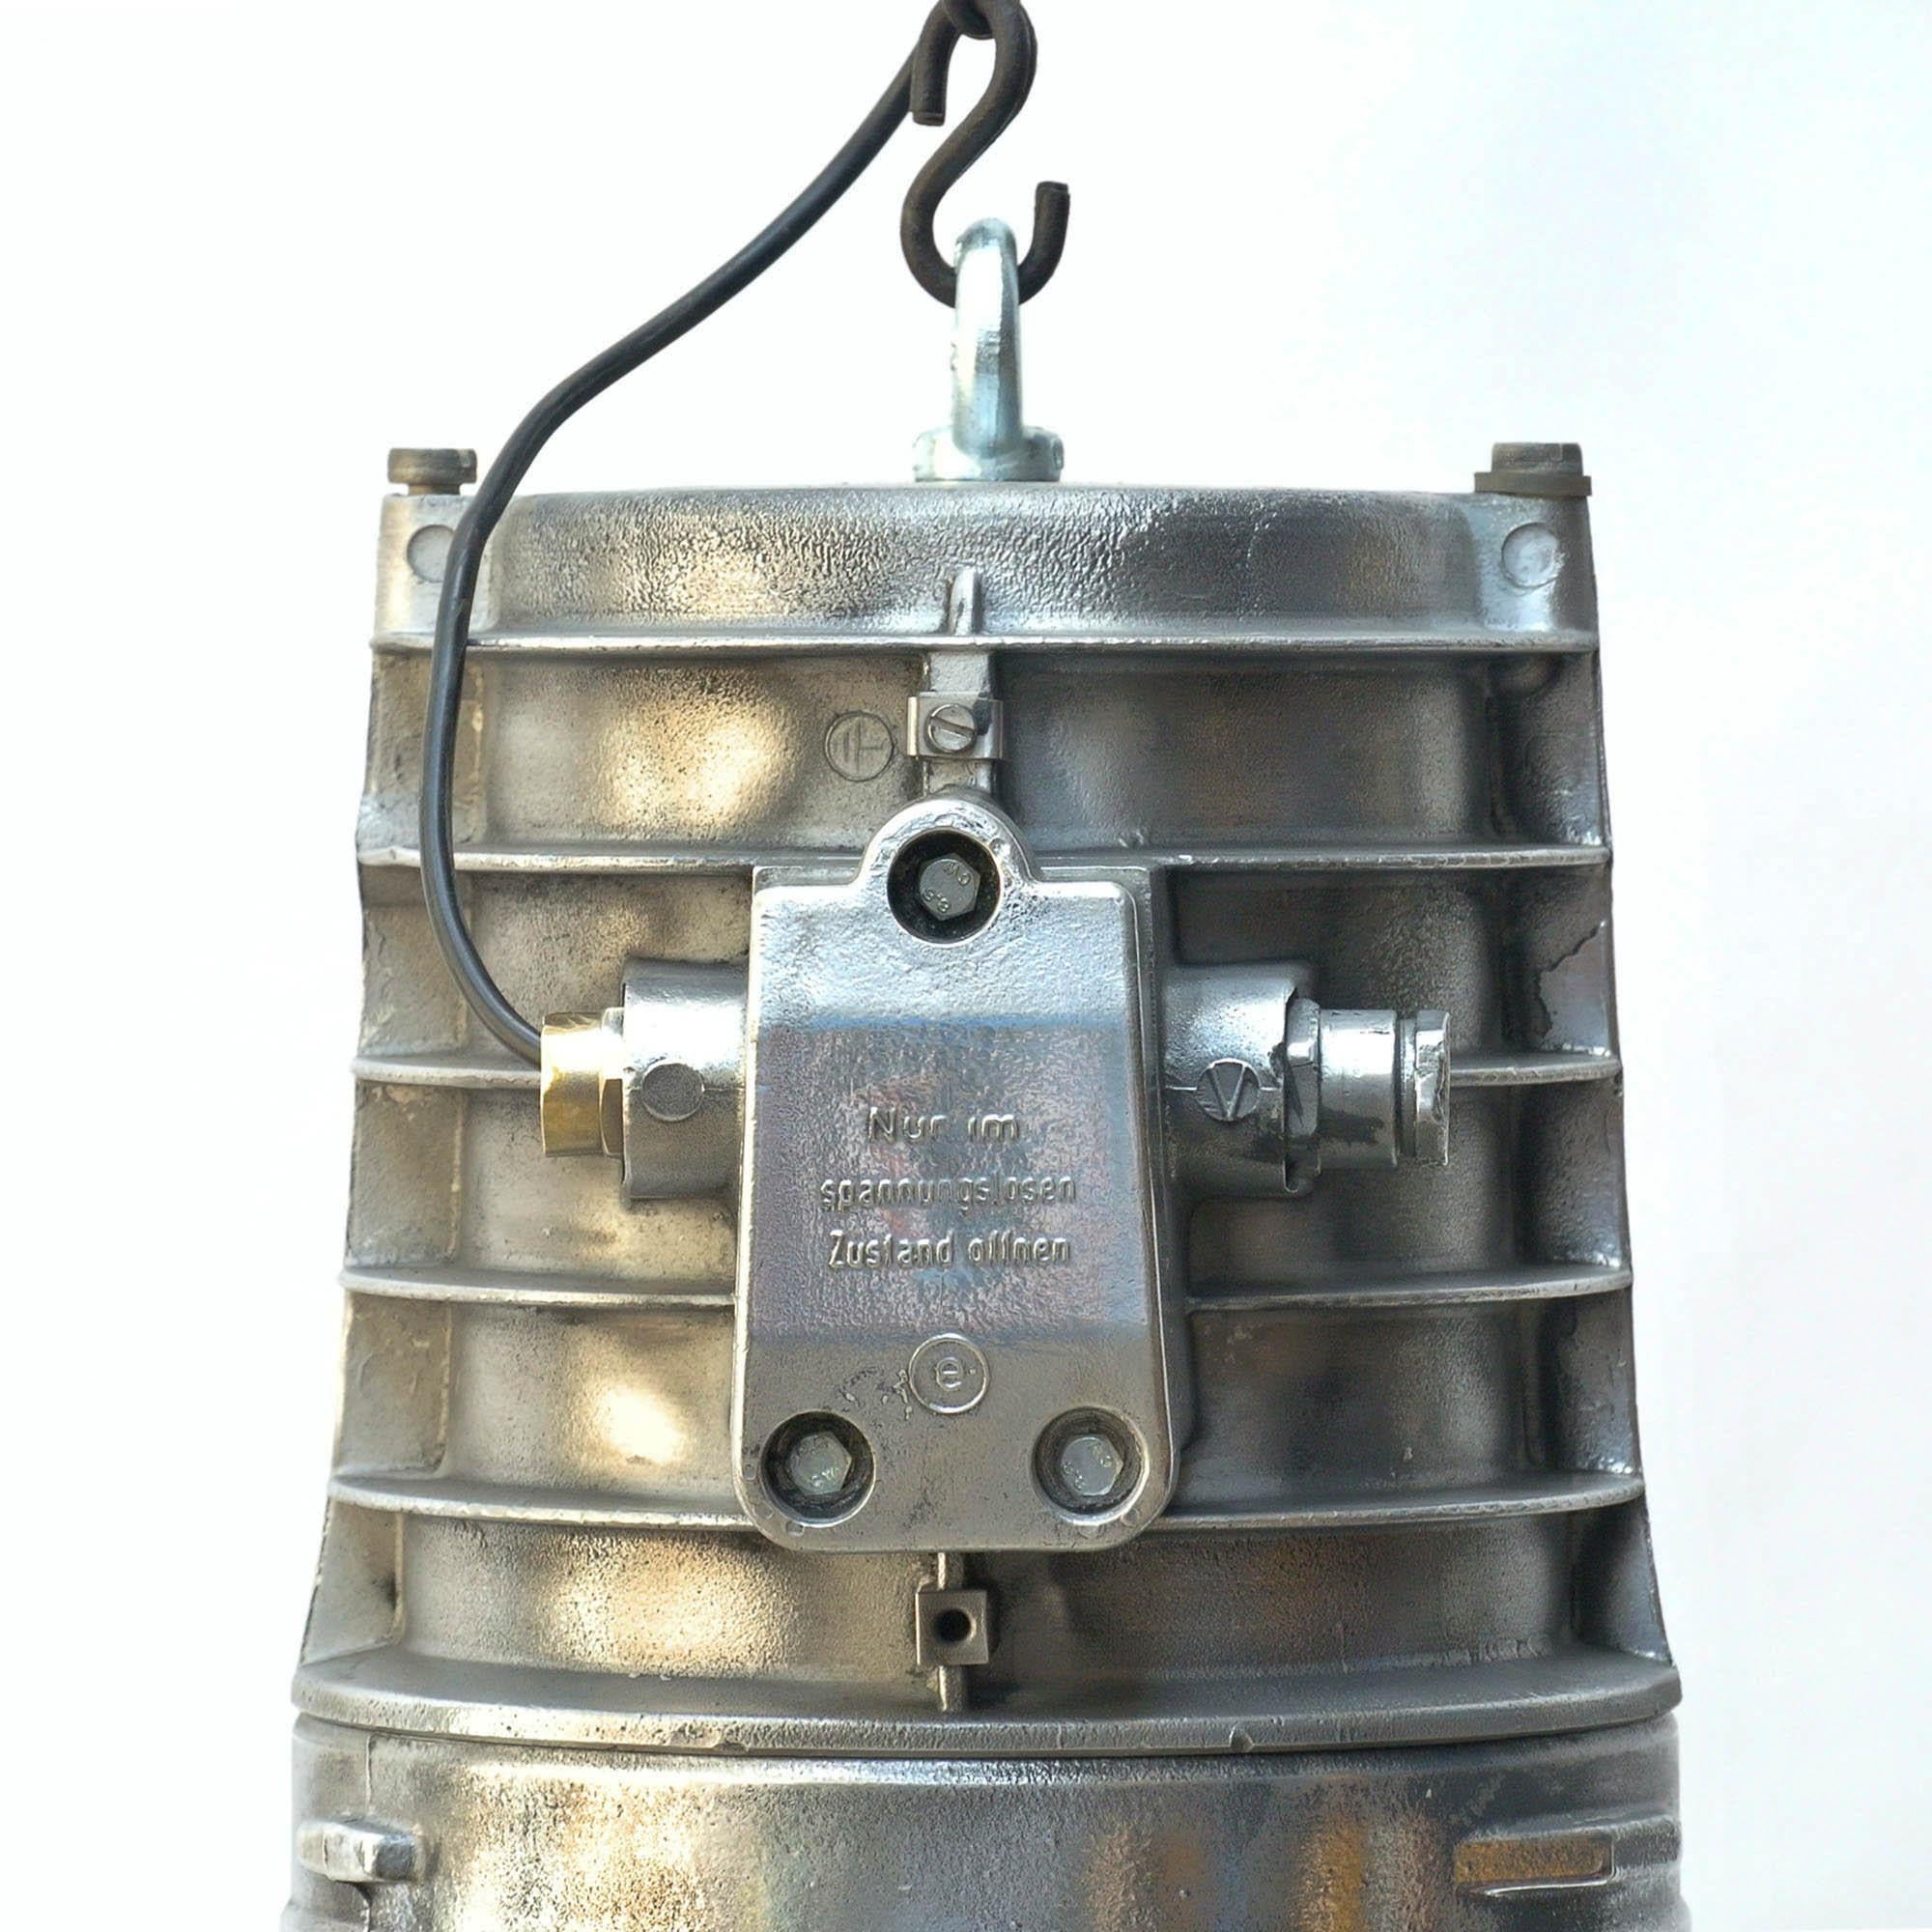 Polished Explosion-Proof Light Used in Chemical Industry Germany, circa 1960-1969 For Sale